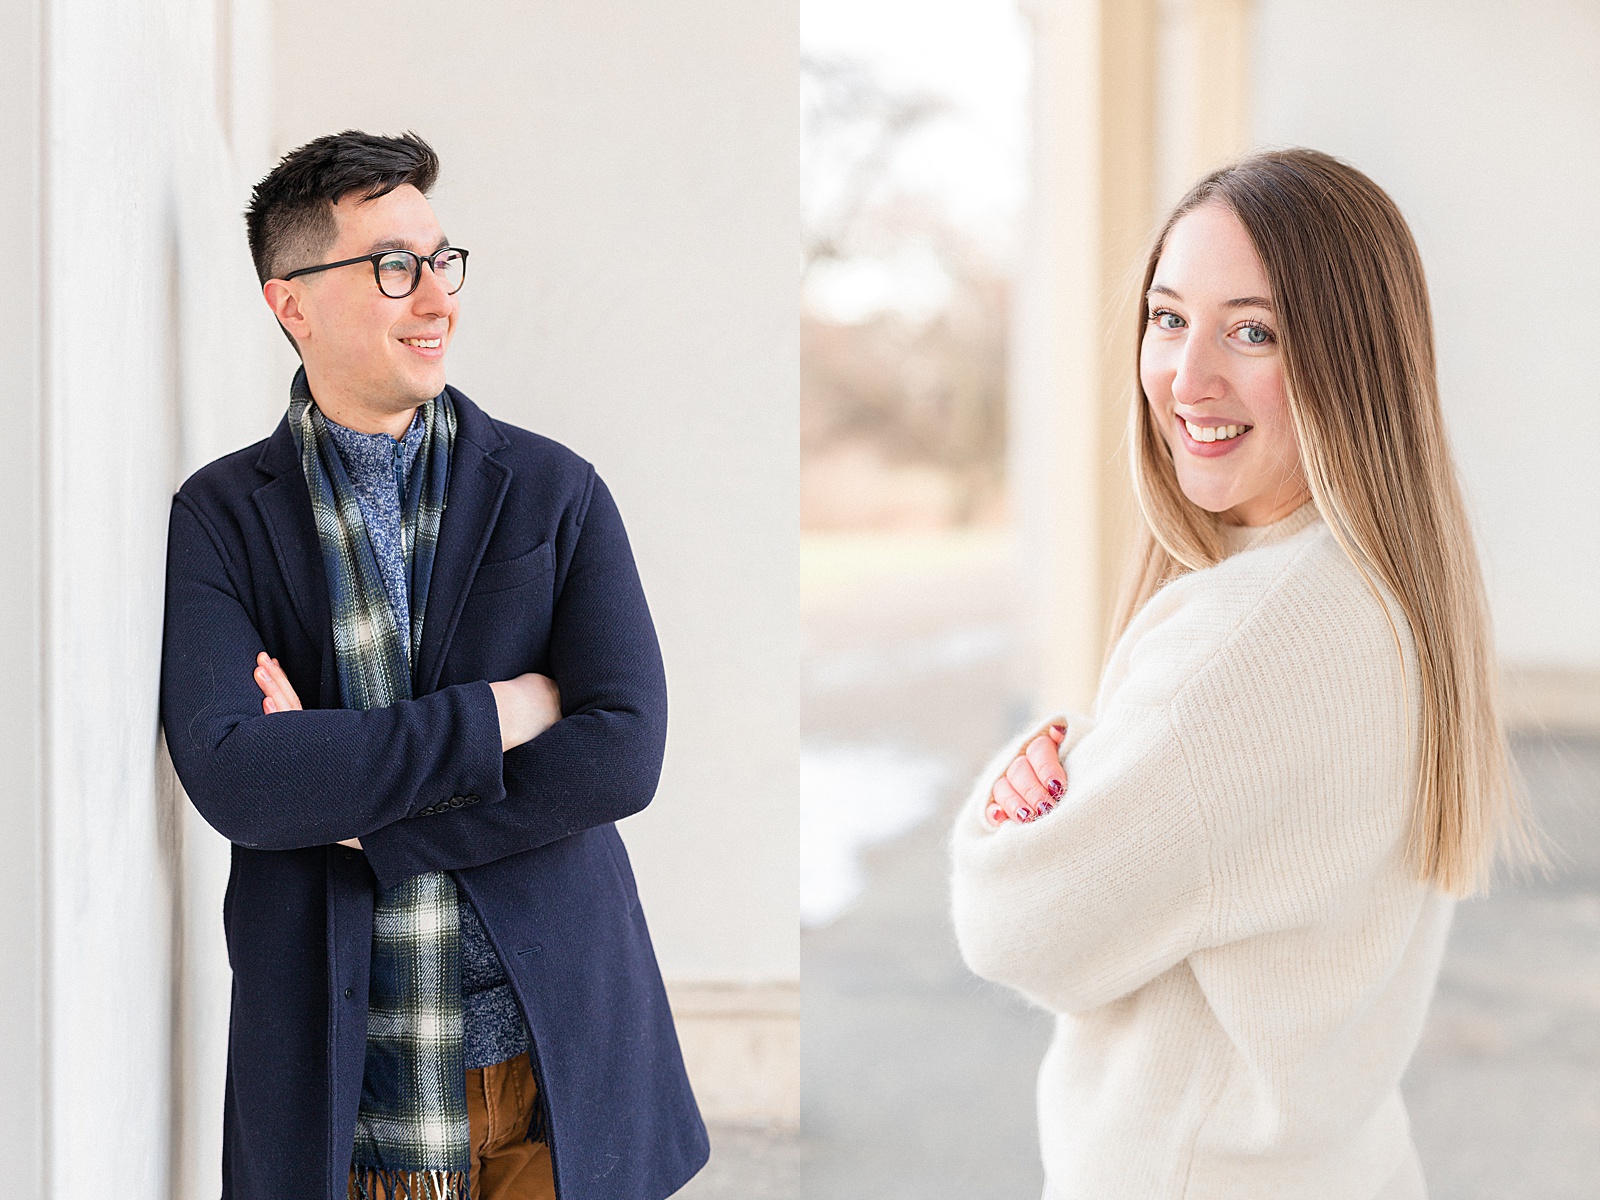 Winter engagement session at dundurn castle